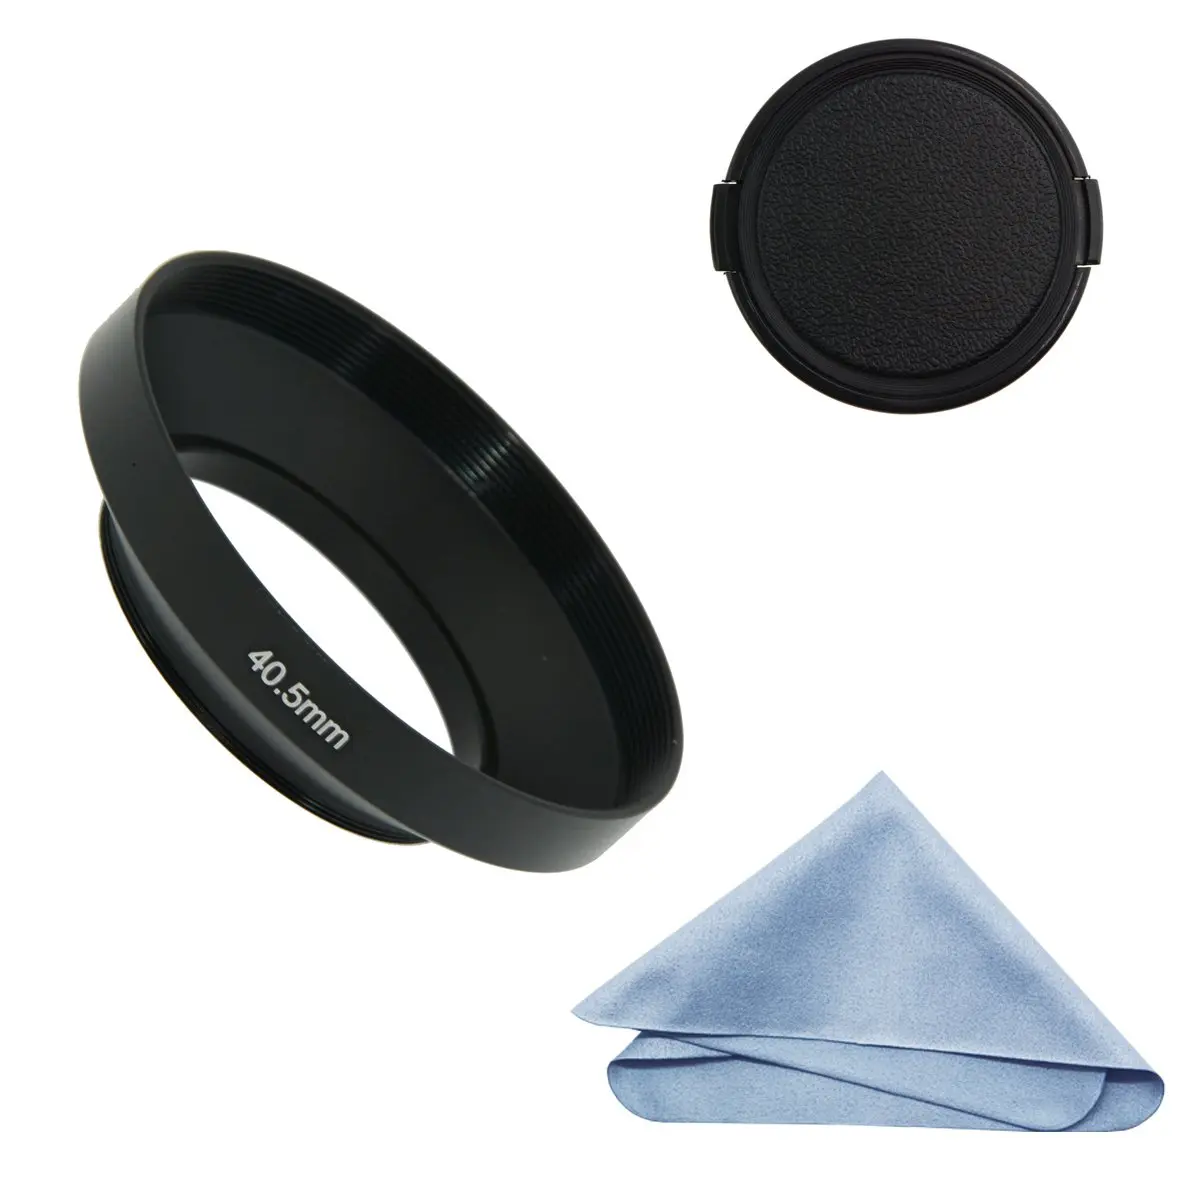 SIOTI Camera Standard Focus Metal Lens Hood with Cleaning Cloth and Lens Cap Compatible with Leica/Fuji/Nikon/Canon/Samsung Standard Thread Lens 